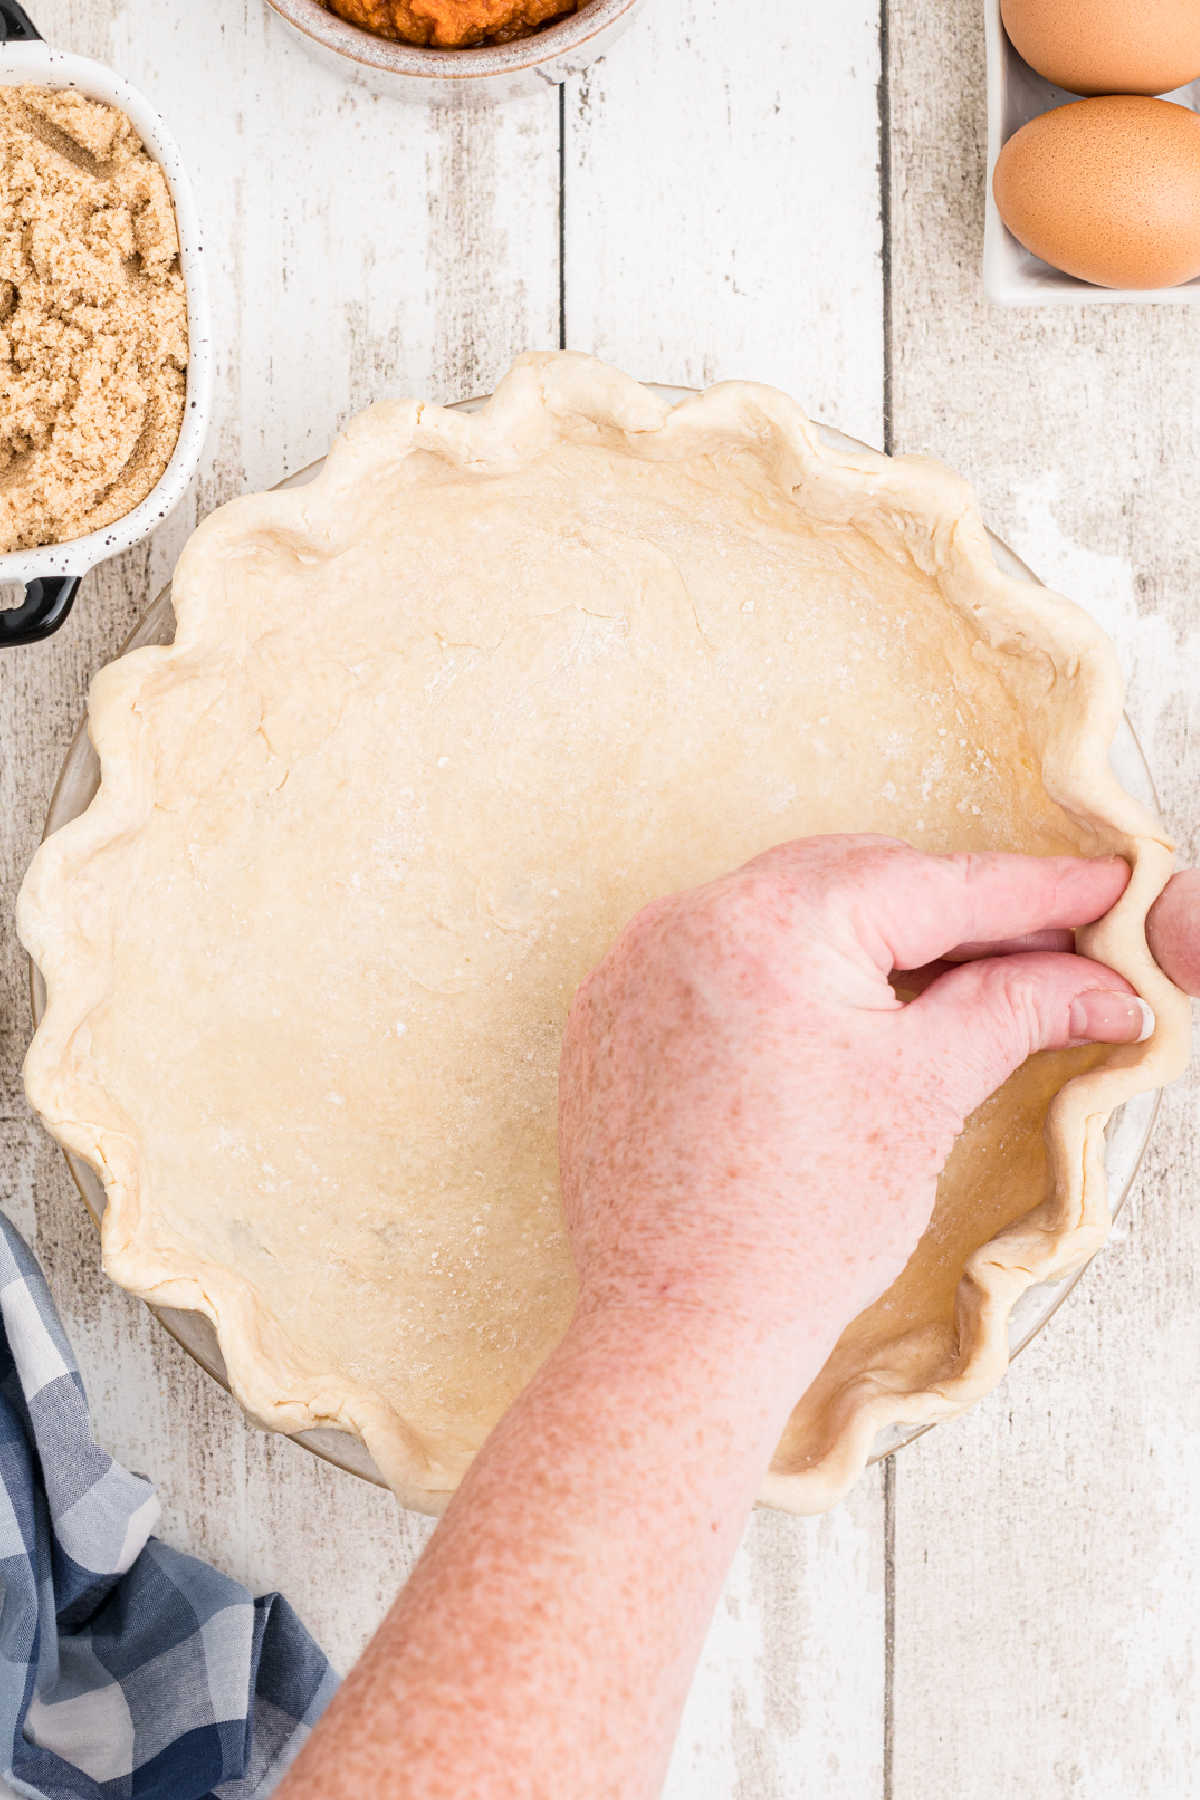 A pie crust having the edges fluted.